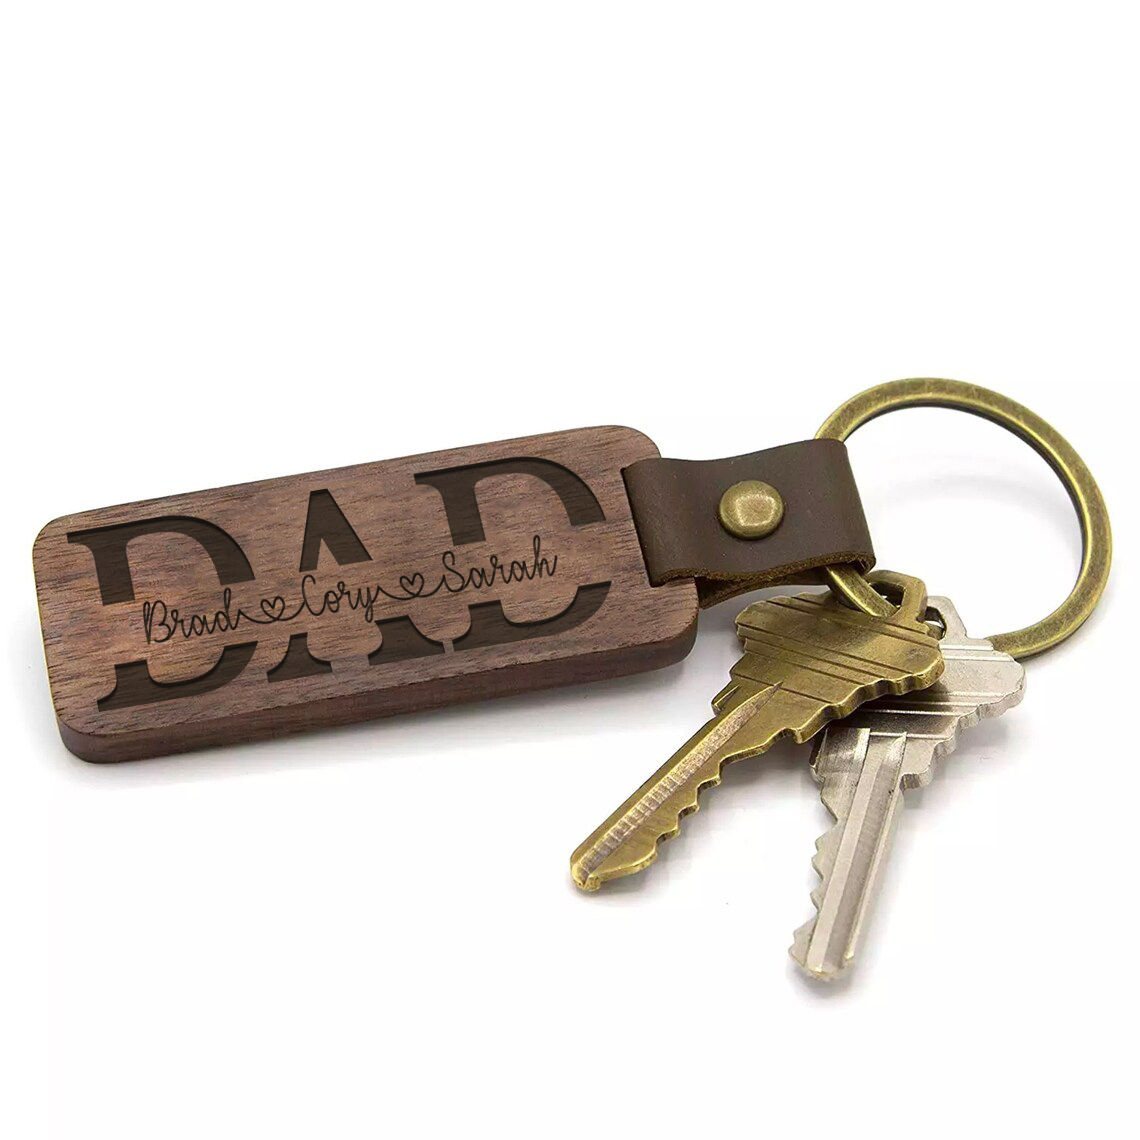 DAD Personalized Engraved Walnut Wood Key Chain FREE SHIPPING